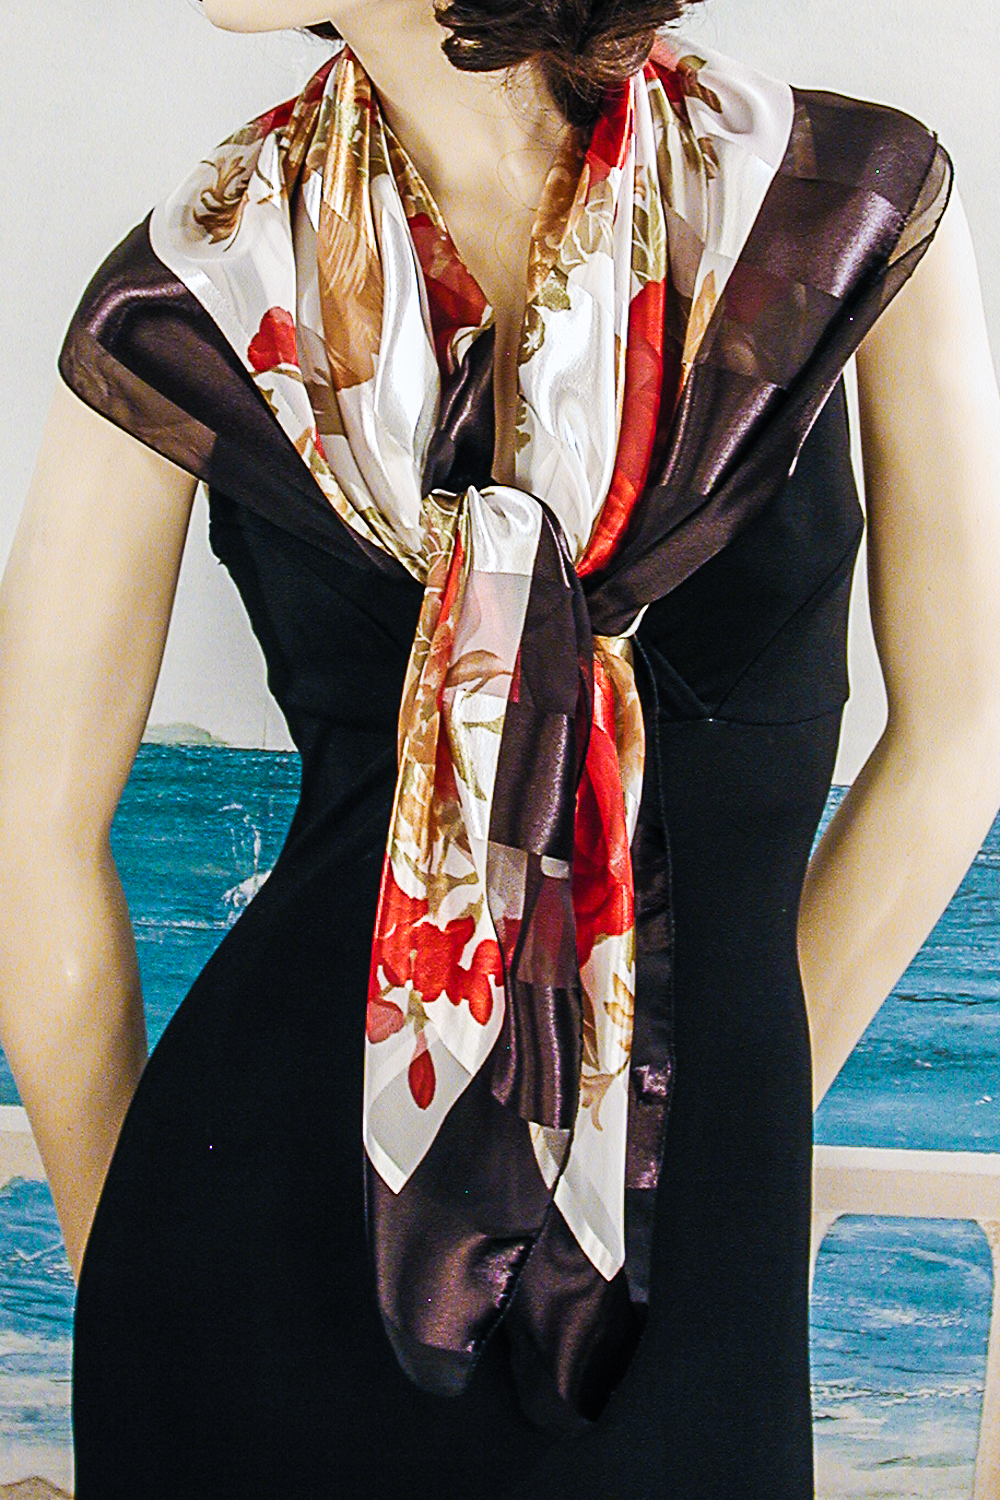 Large Chiffon and Satin Scarf with Bright Red Roses, a fashion accessorie - Evening Elegance